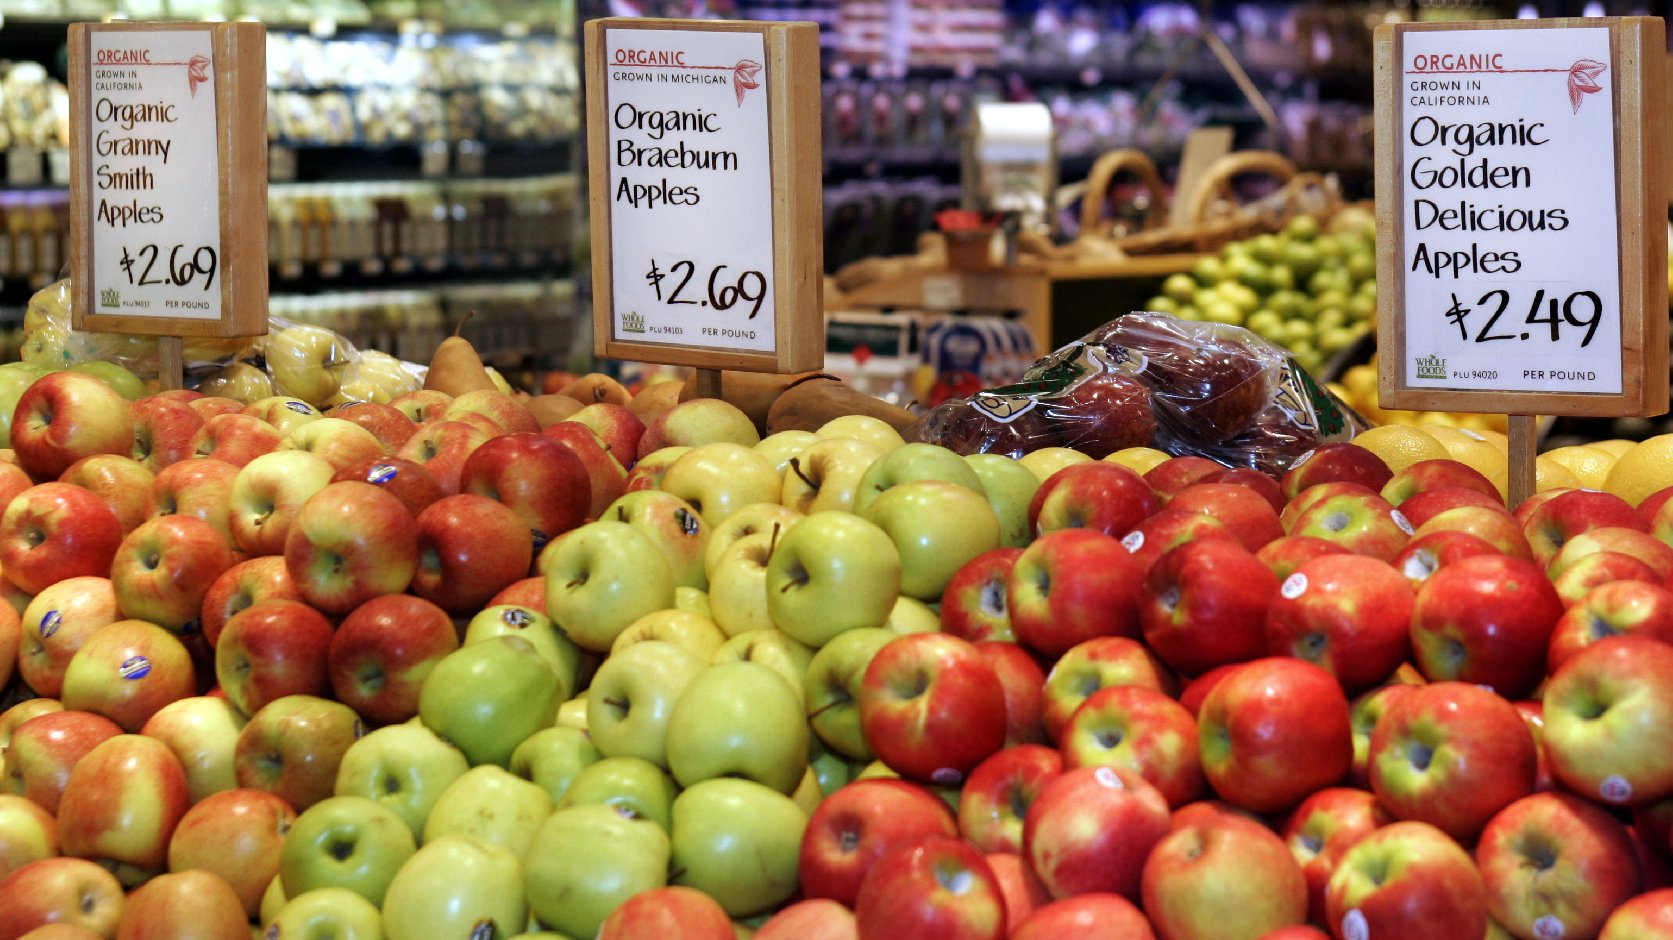 The National Organic Standards Board voted to no longer allow farmers to use the antibiotic streptomycin on organic apple and pear trees. Photo: Jeff Haynes/AFP/Getty Images